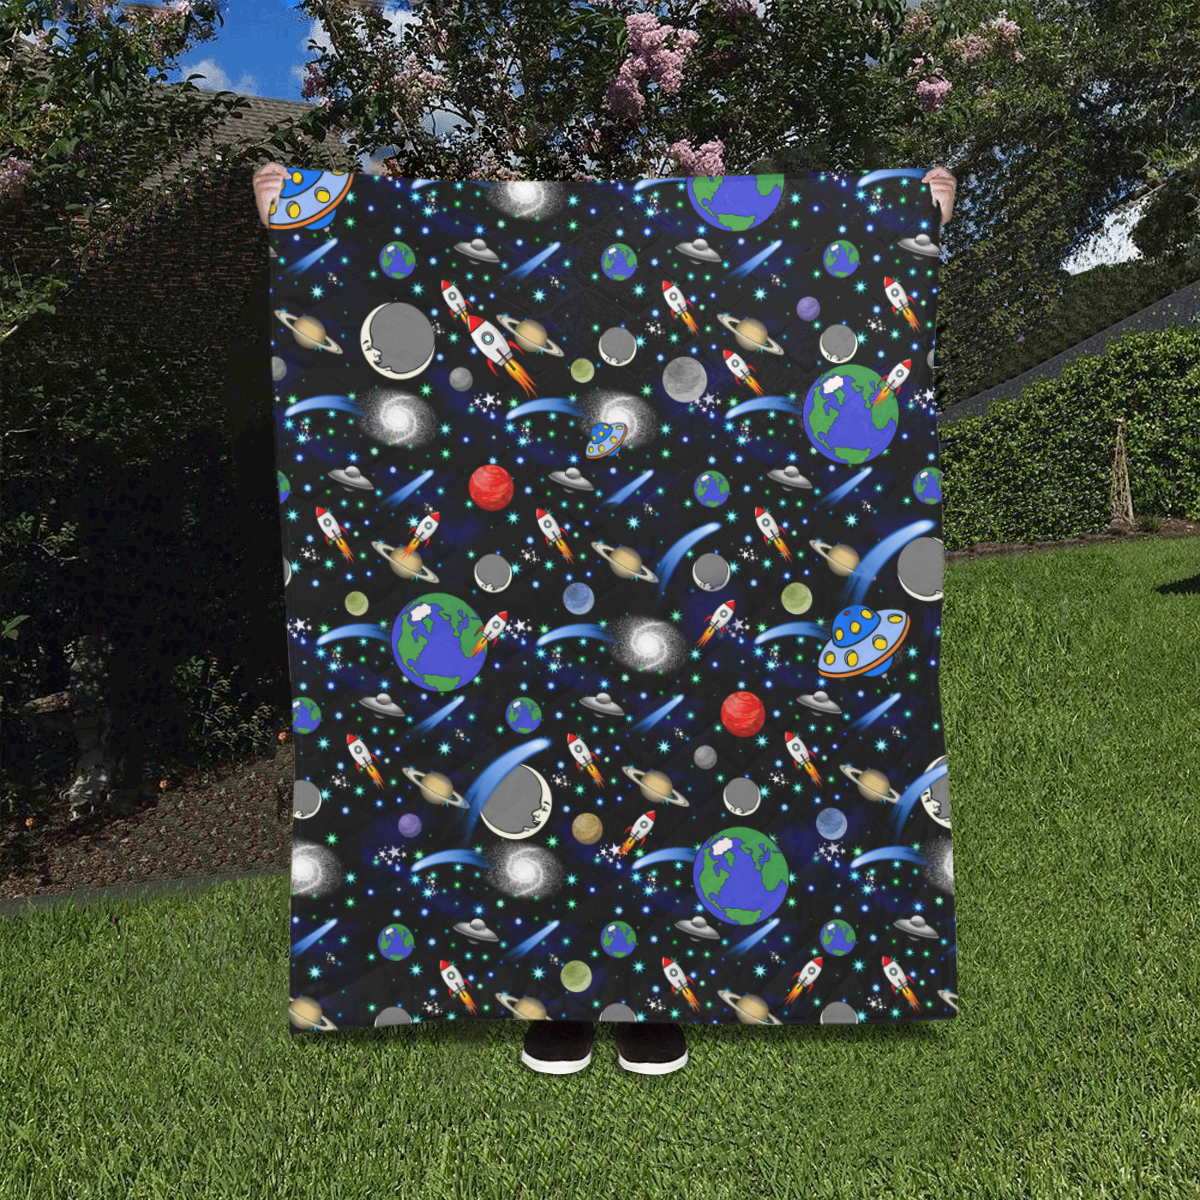 Galaxy Universe - Planets, Stars, Comets, Rockets Quilt 40"x50"